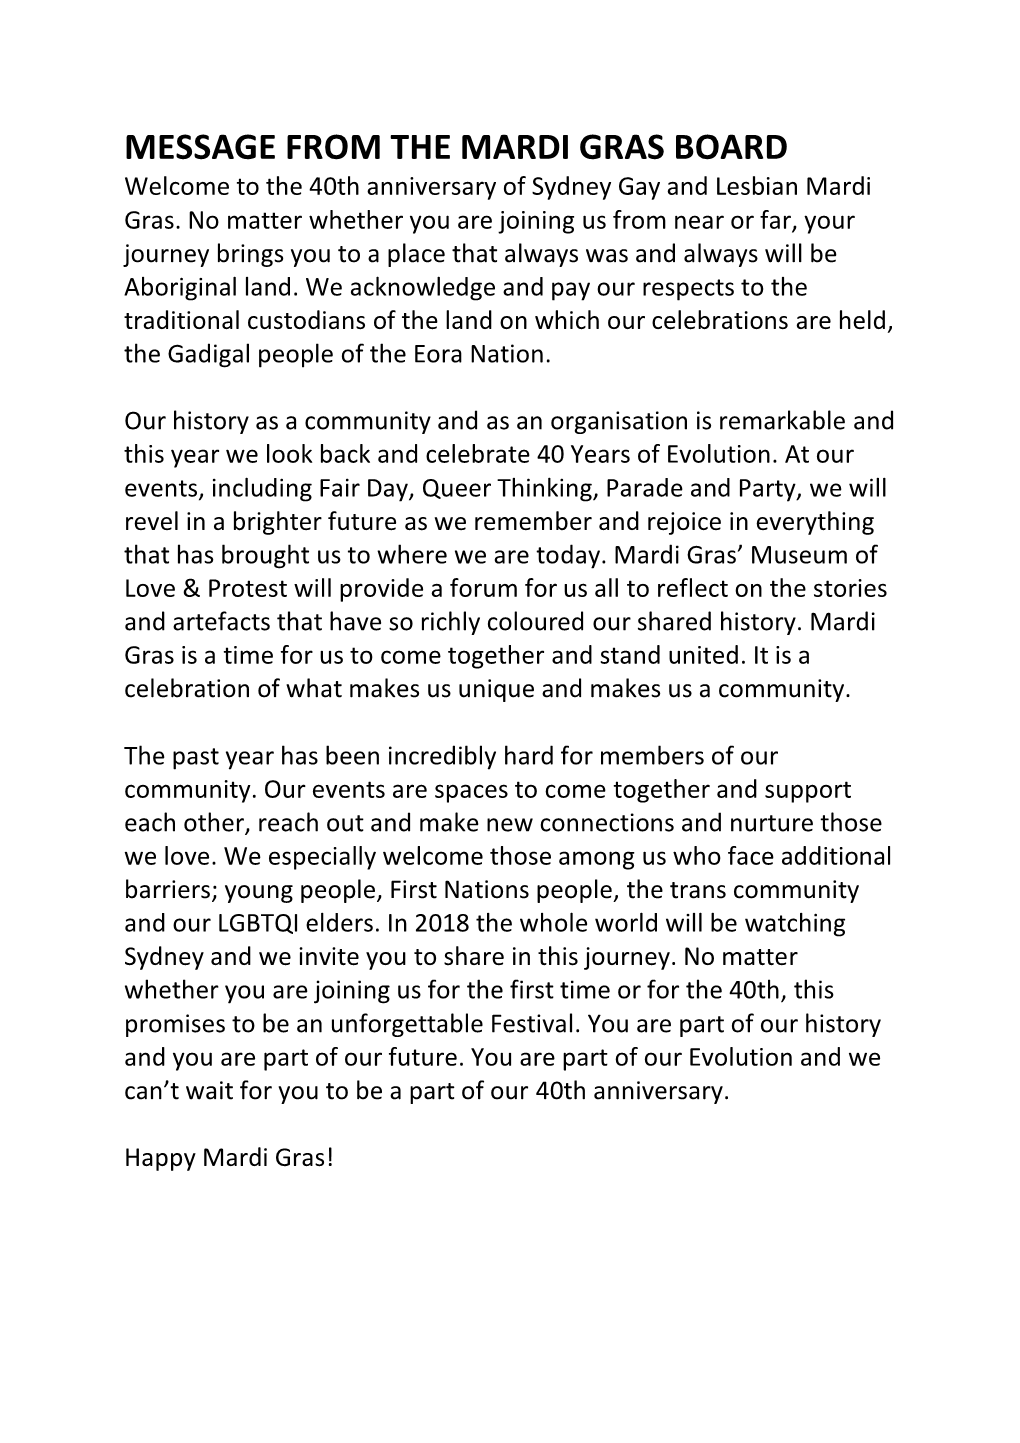 MESSAGE from the MARDI GRAS BOARD Welcome to the 40Th Anniversary of Sydney Gay and Lesbian Mardi Gras